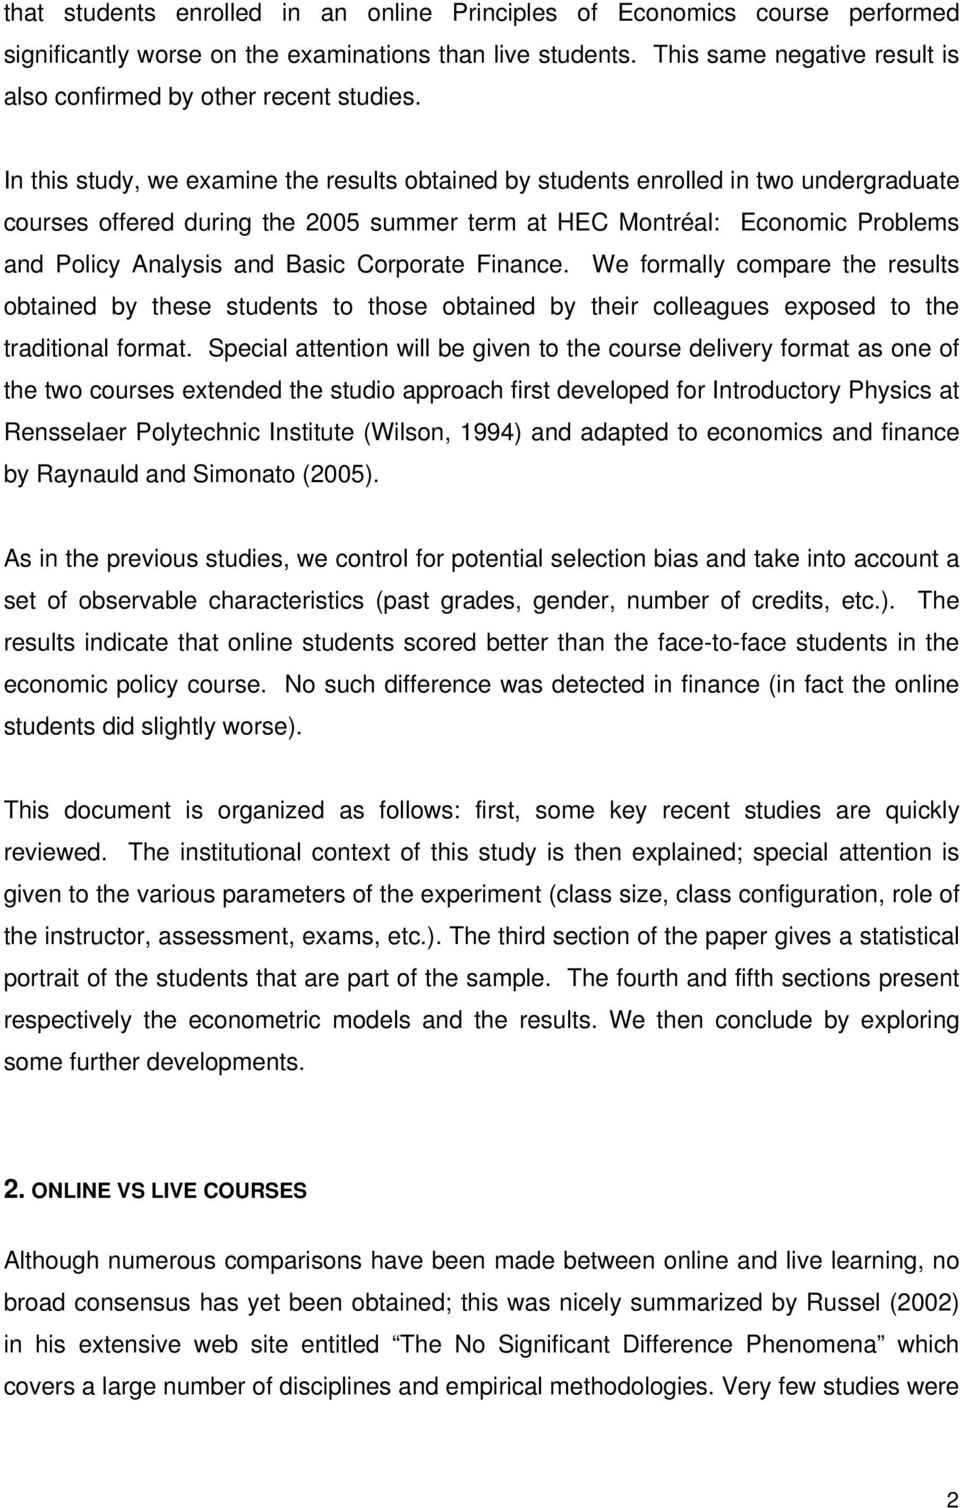 In this study, we examine the results obtained by students enrolled in two undergraduate courses offered during the 2005 summer term at HEC Montréal: Economic Problems and Policy Analysis and Basic